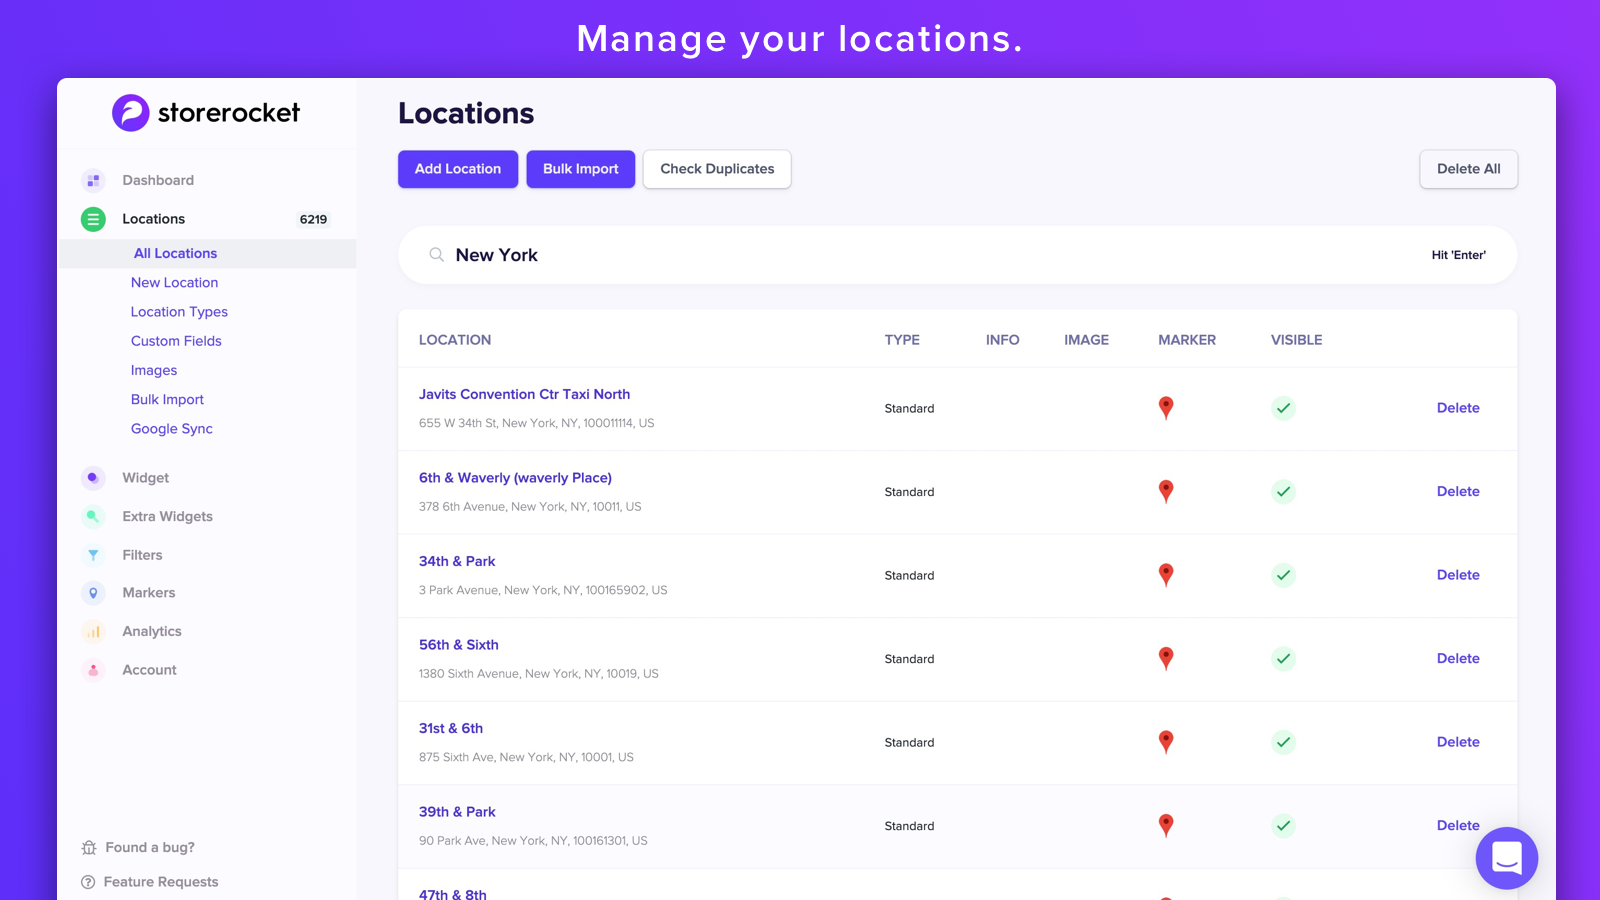 Manage your locations